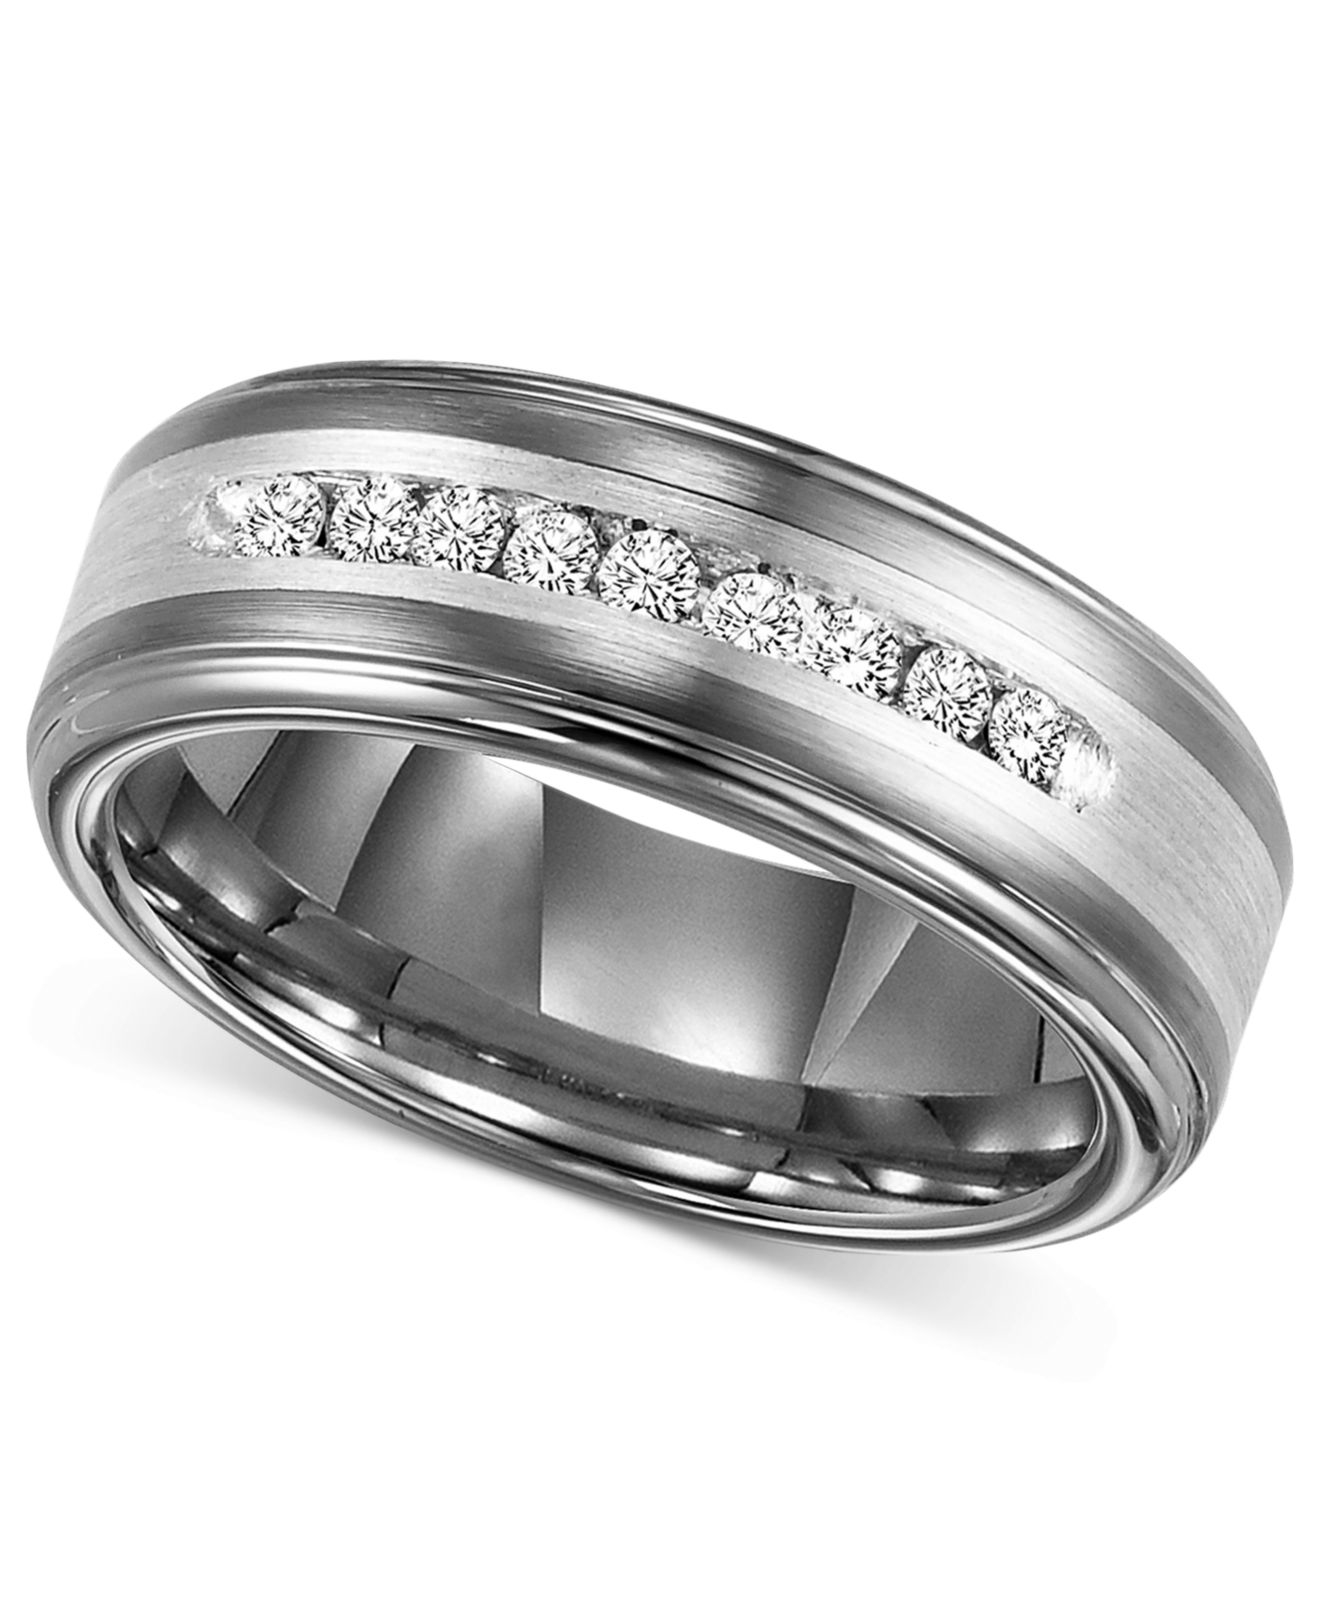 Triton Men's Tungsten Carbide And Diamond Wedding Band Ring In Sterling ...